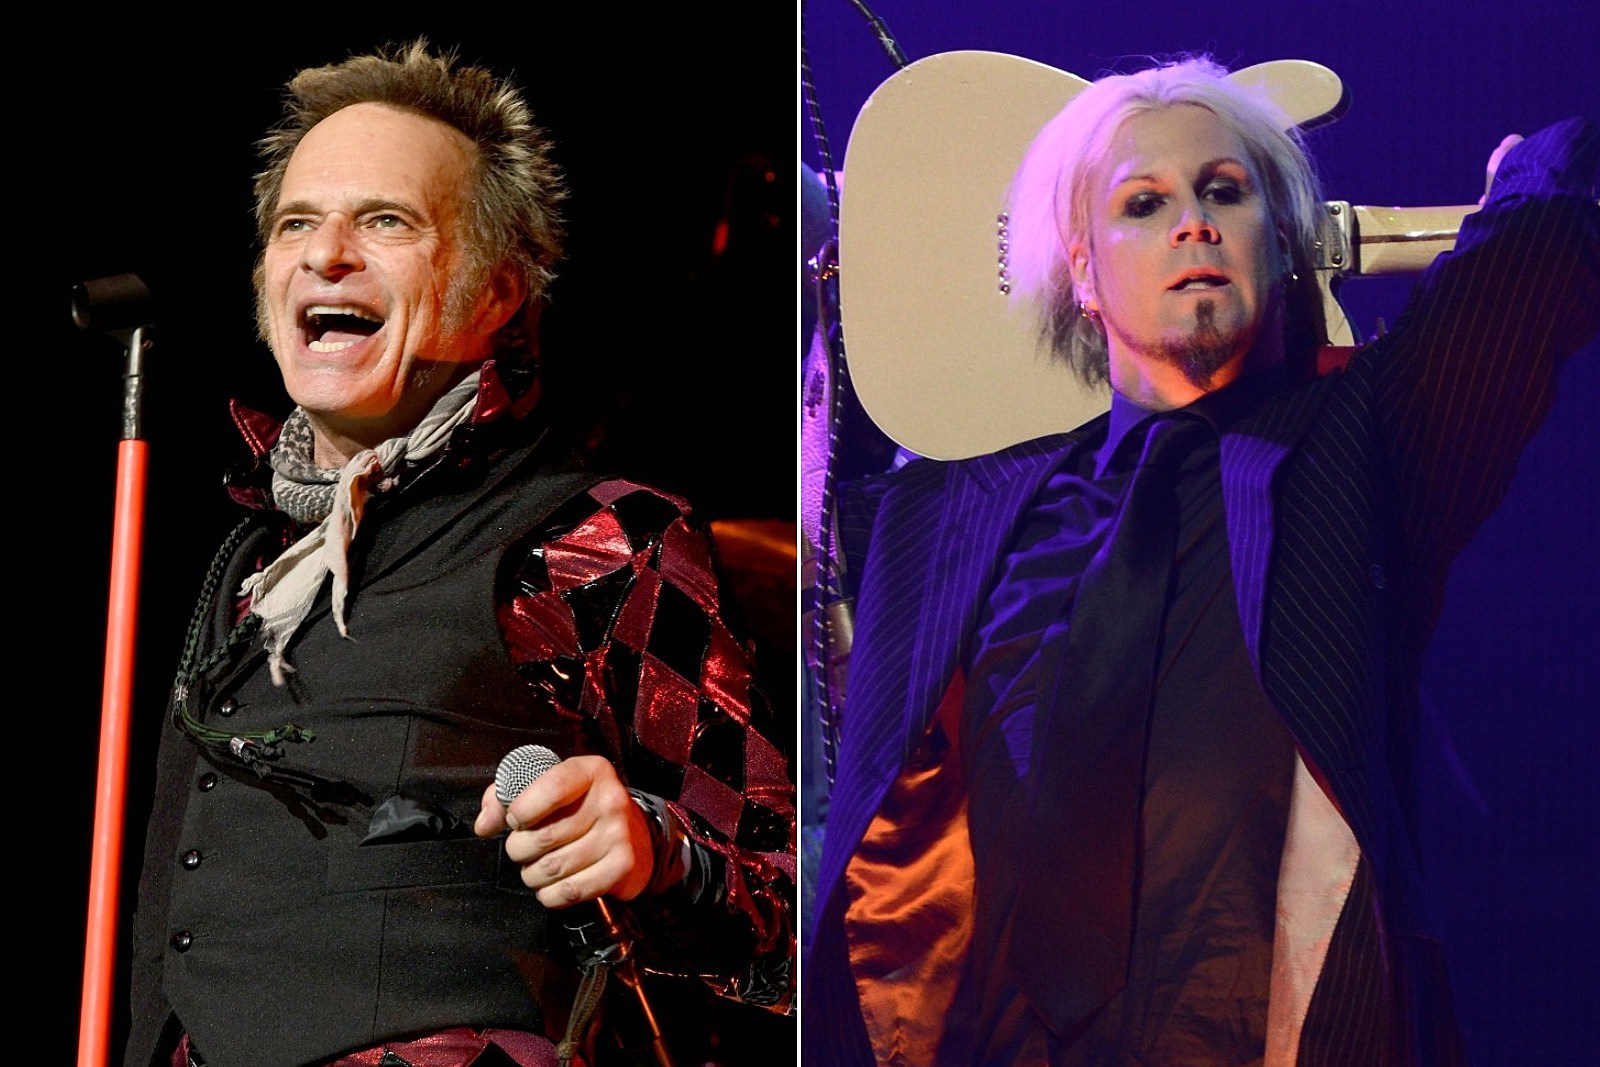 John 5 'Will Beg' David Lee Roth to Release Collaborative Song